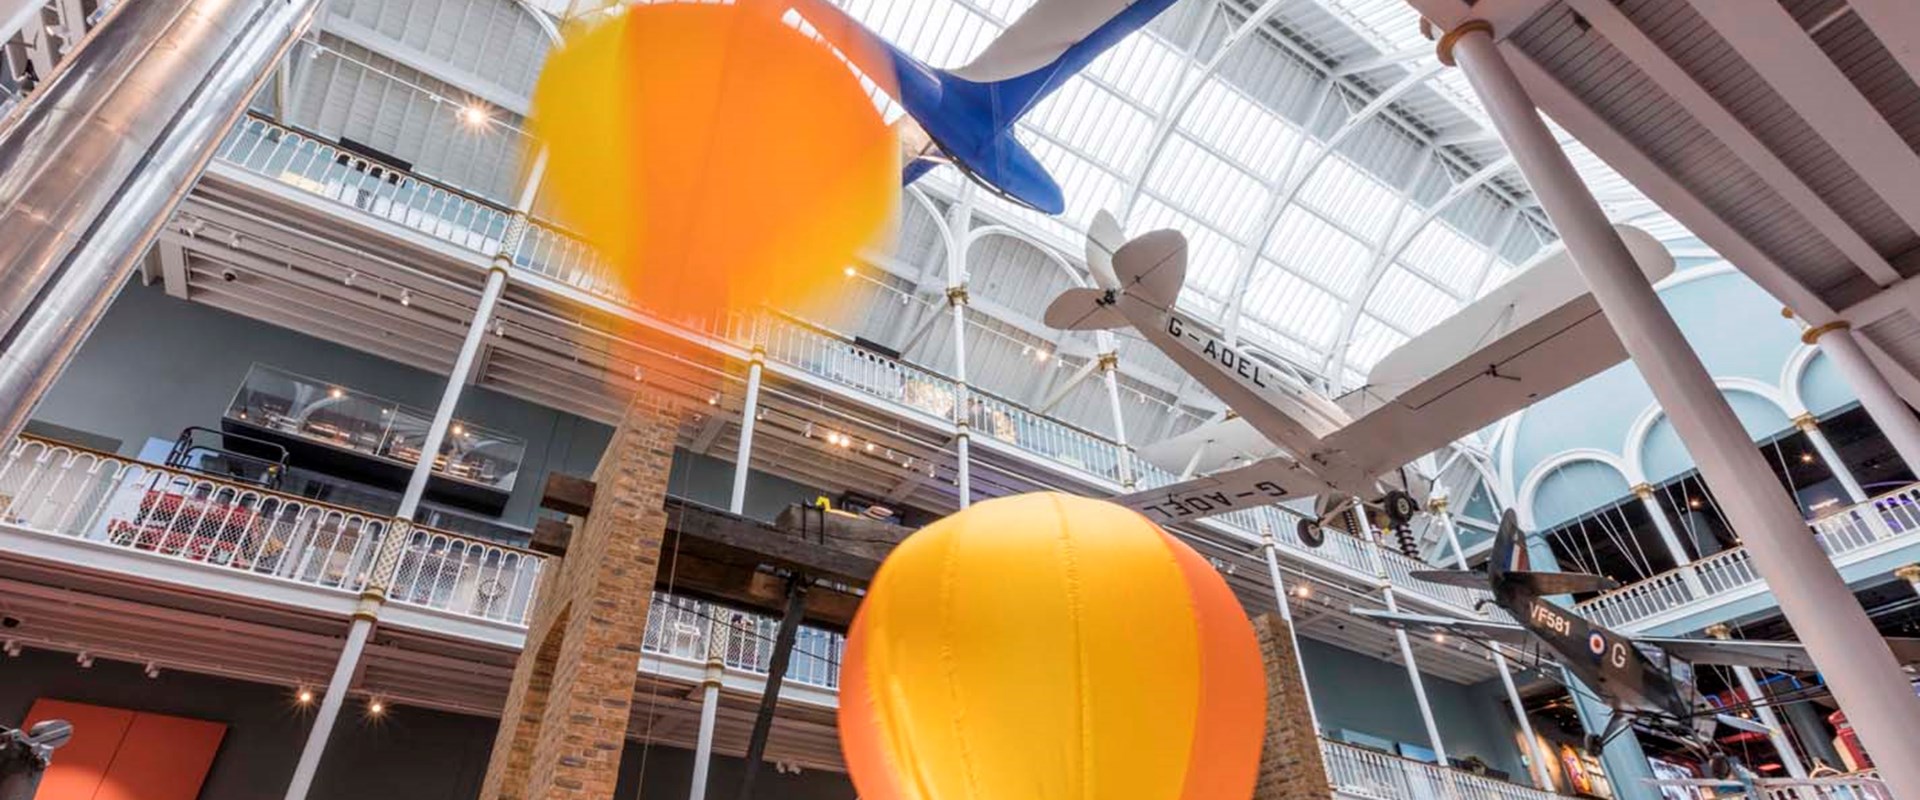 2016_ScienceGalleries_Balloons2